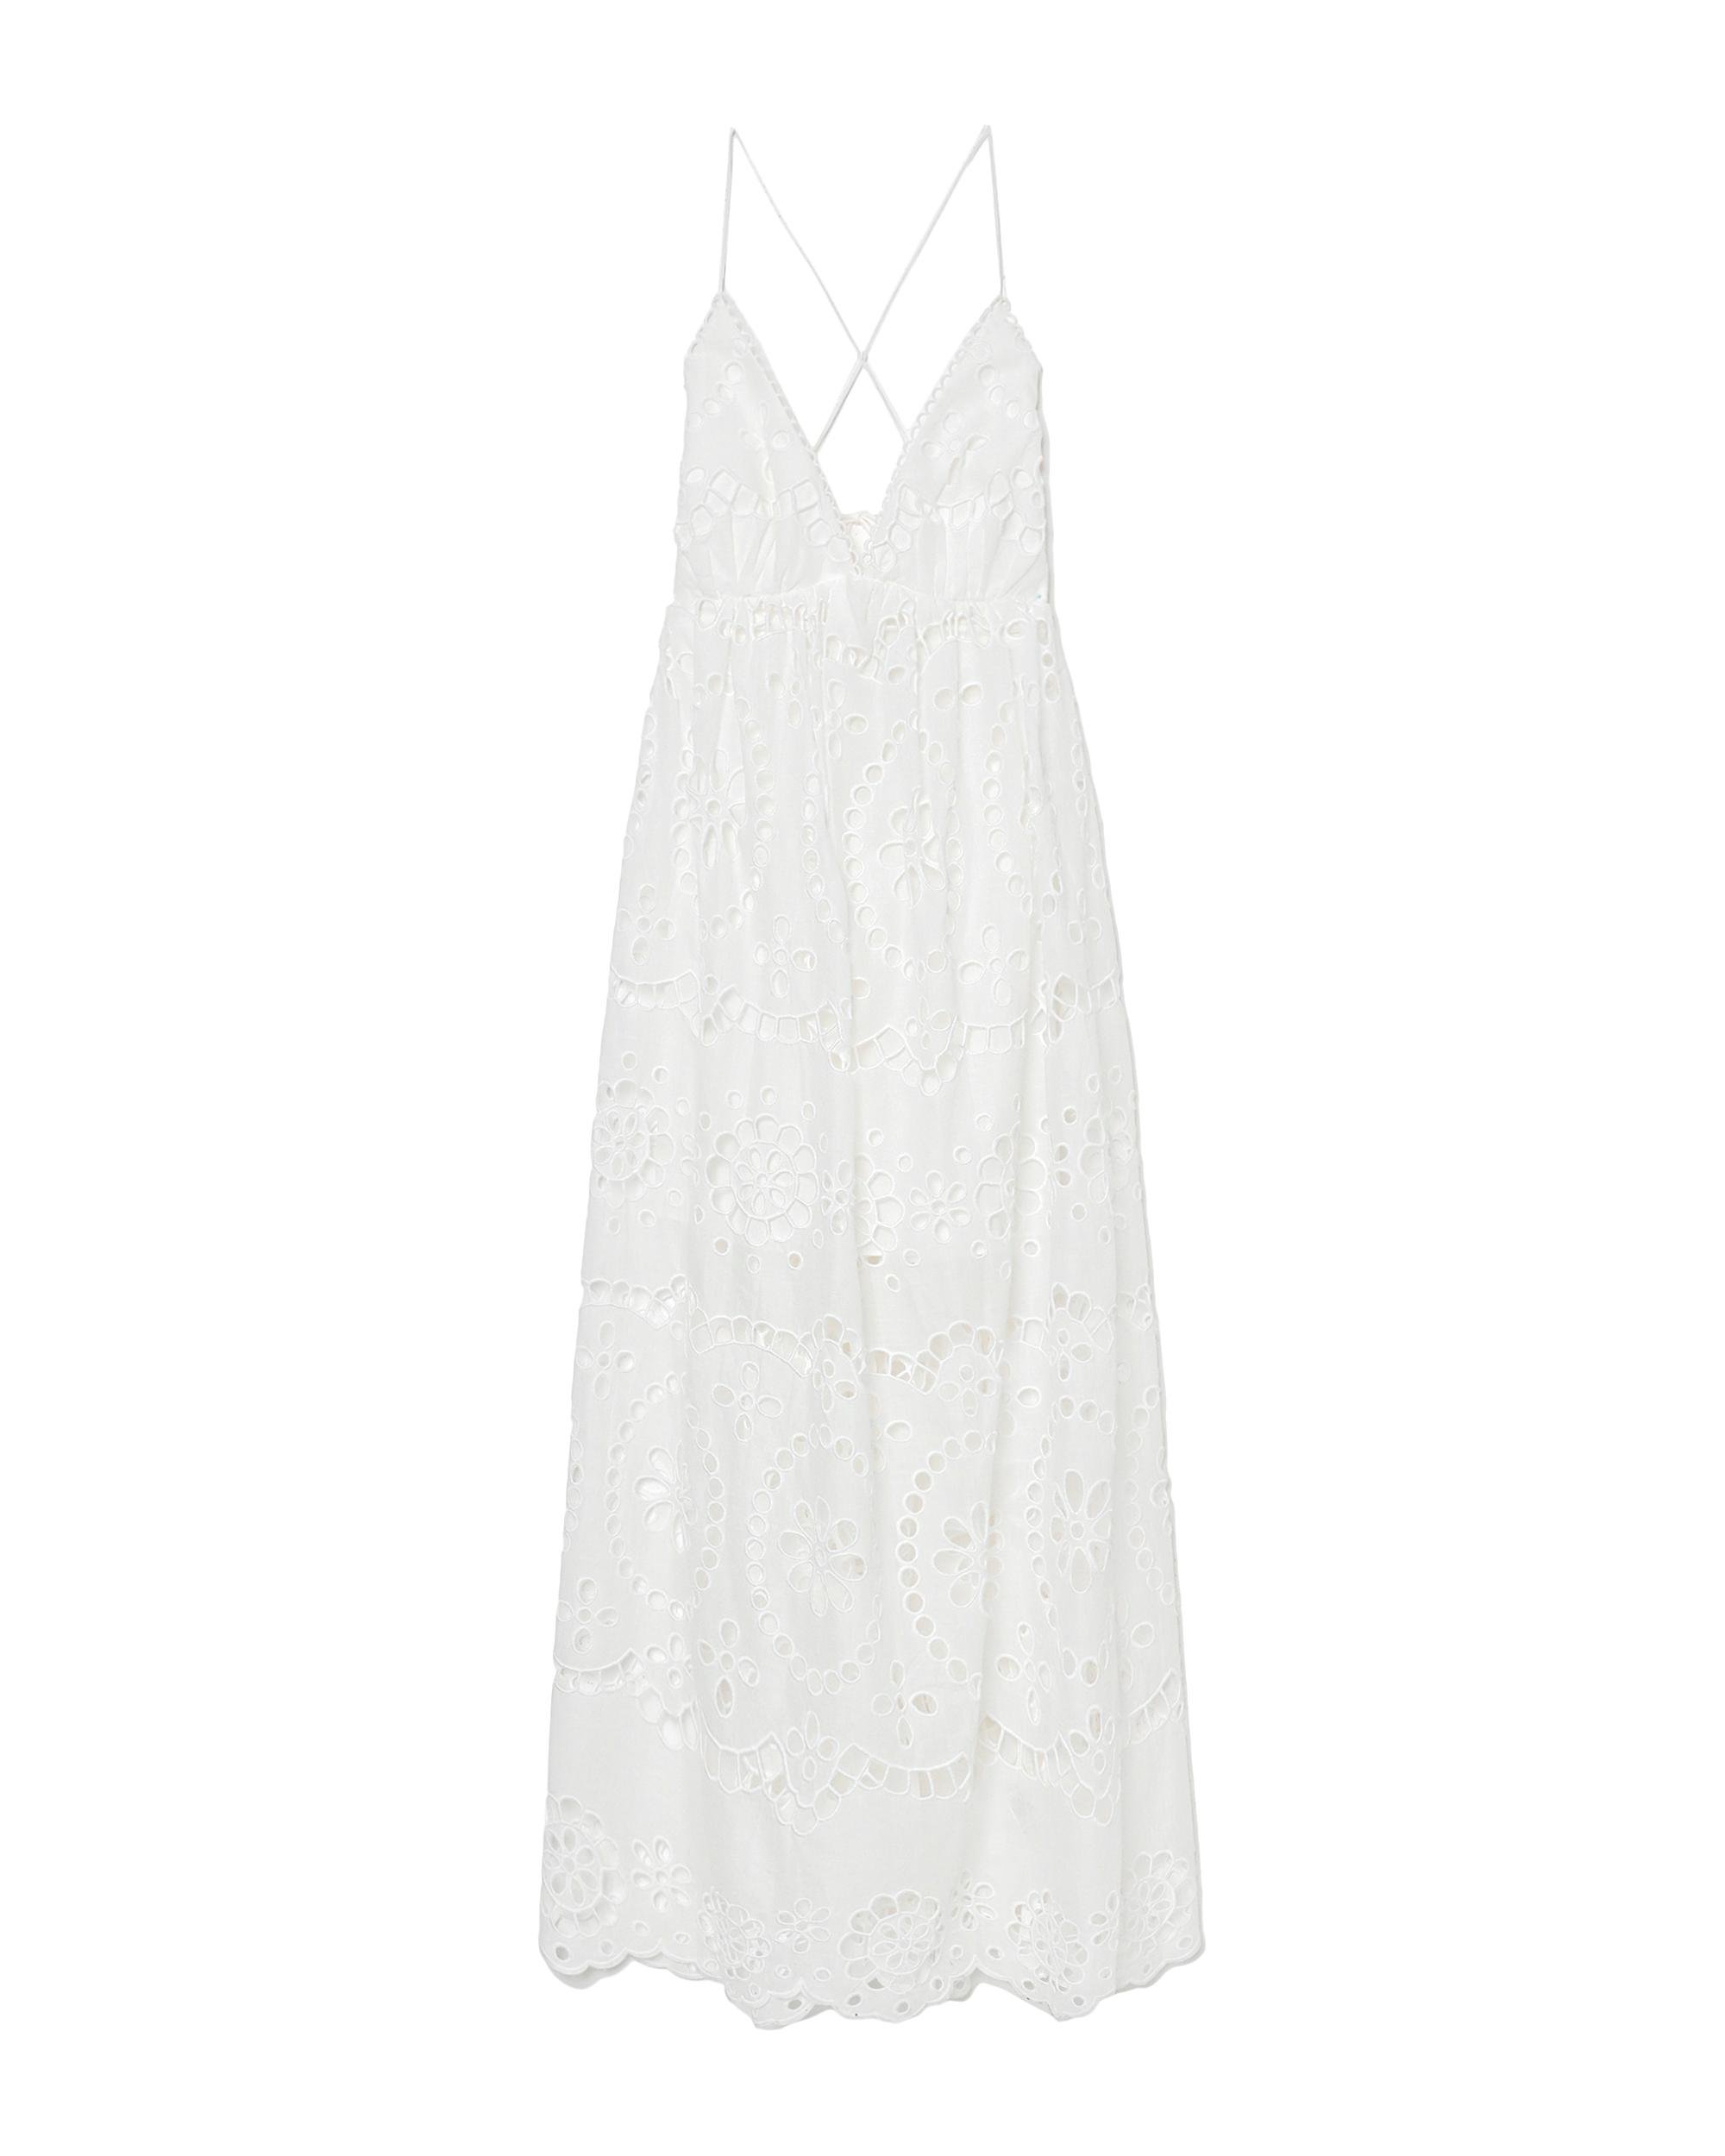 Lexi embroidered slip dress by ZIMMERMANN